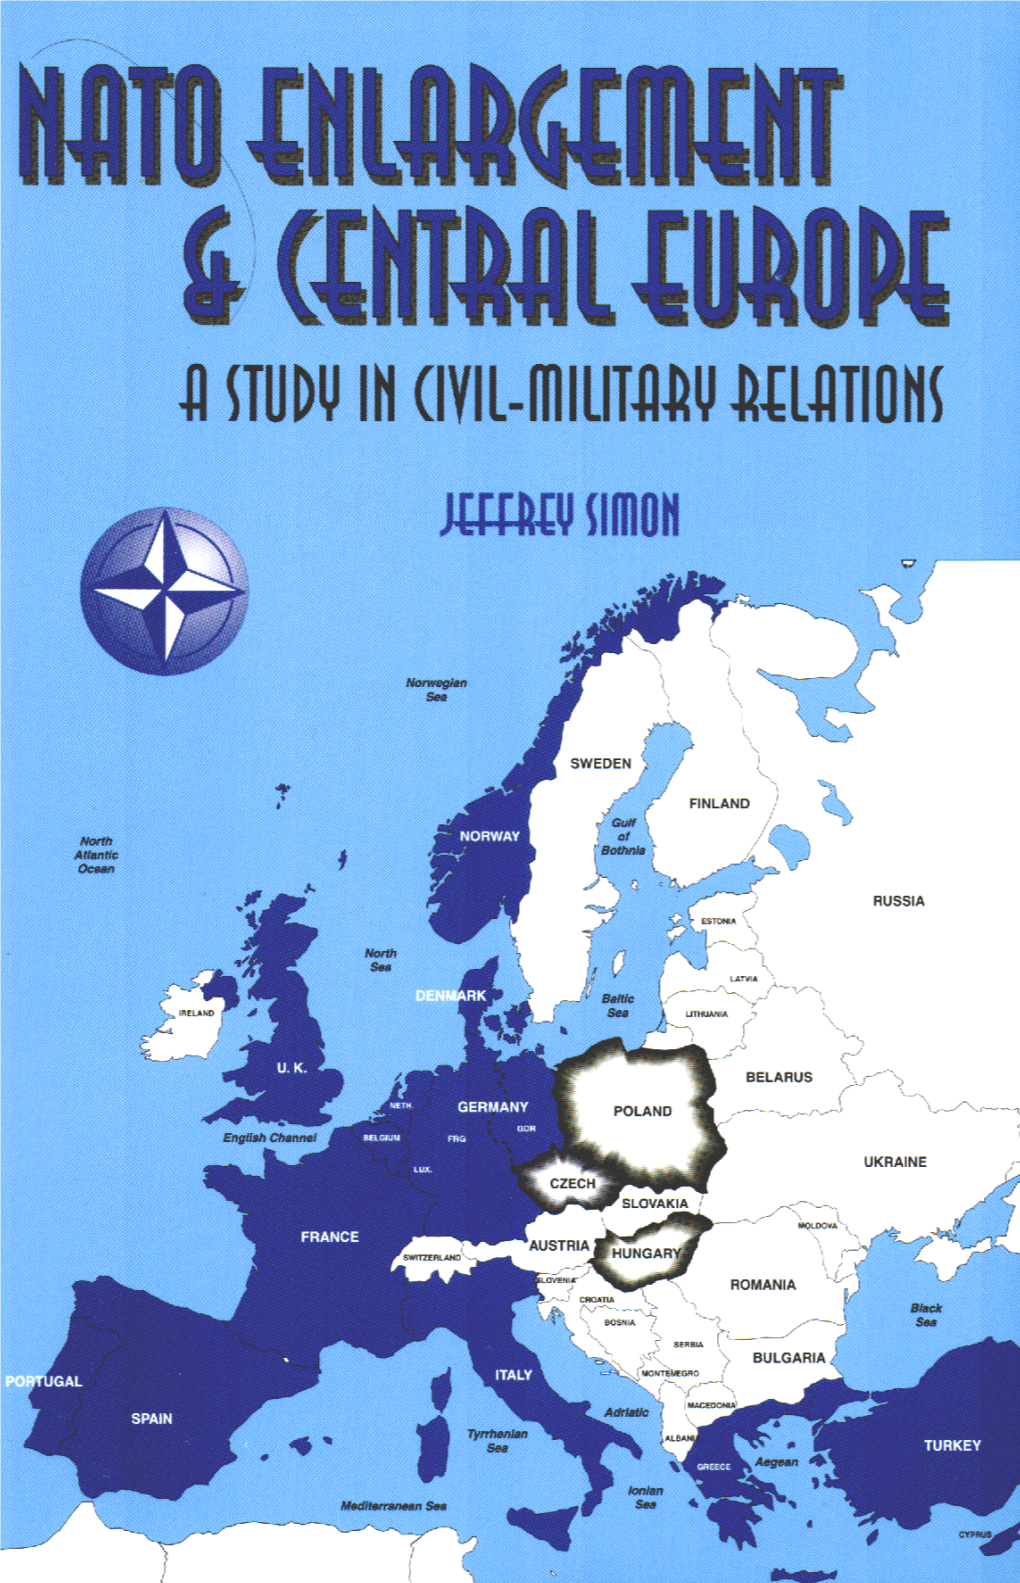 Nato Enlargement and Central Europe a Study in Cml-Military Relations Nato Enlargement and Central Europe a Study in Cml-Military Relations